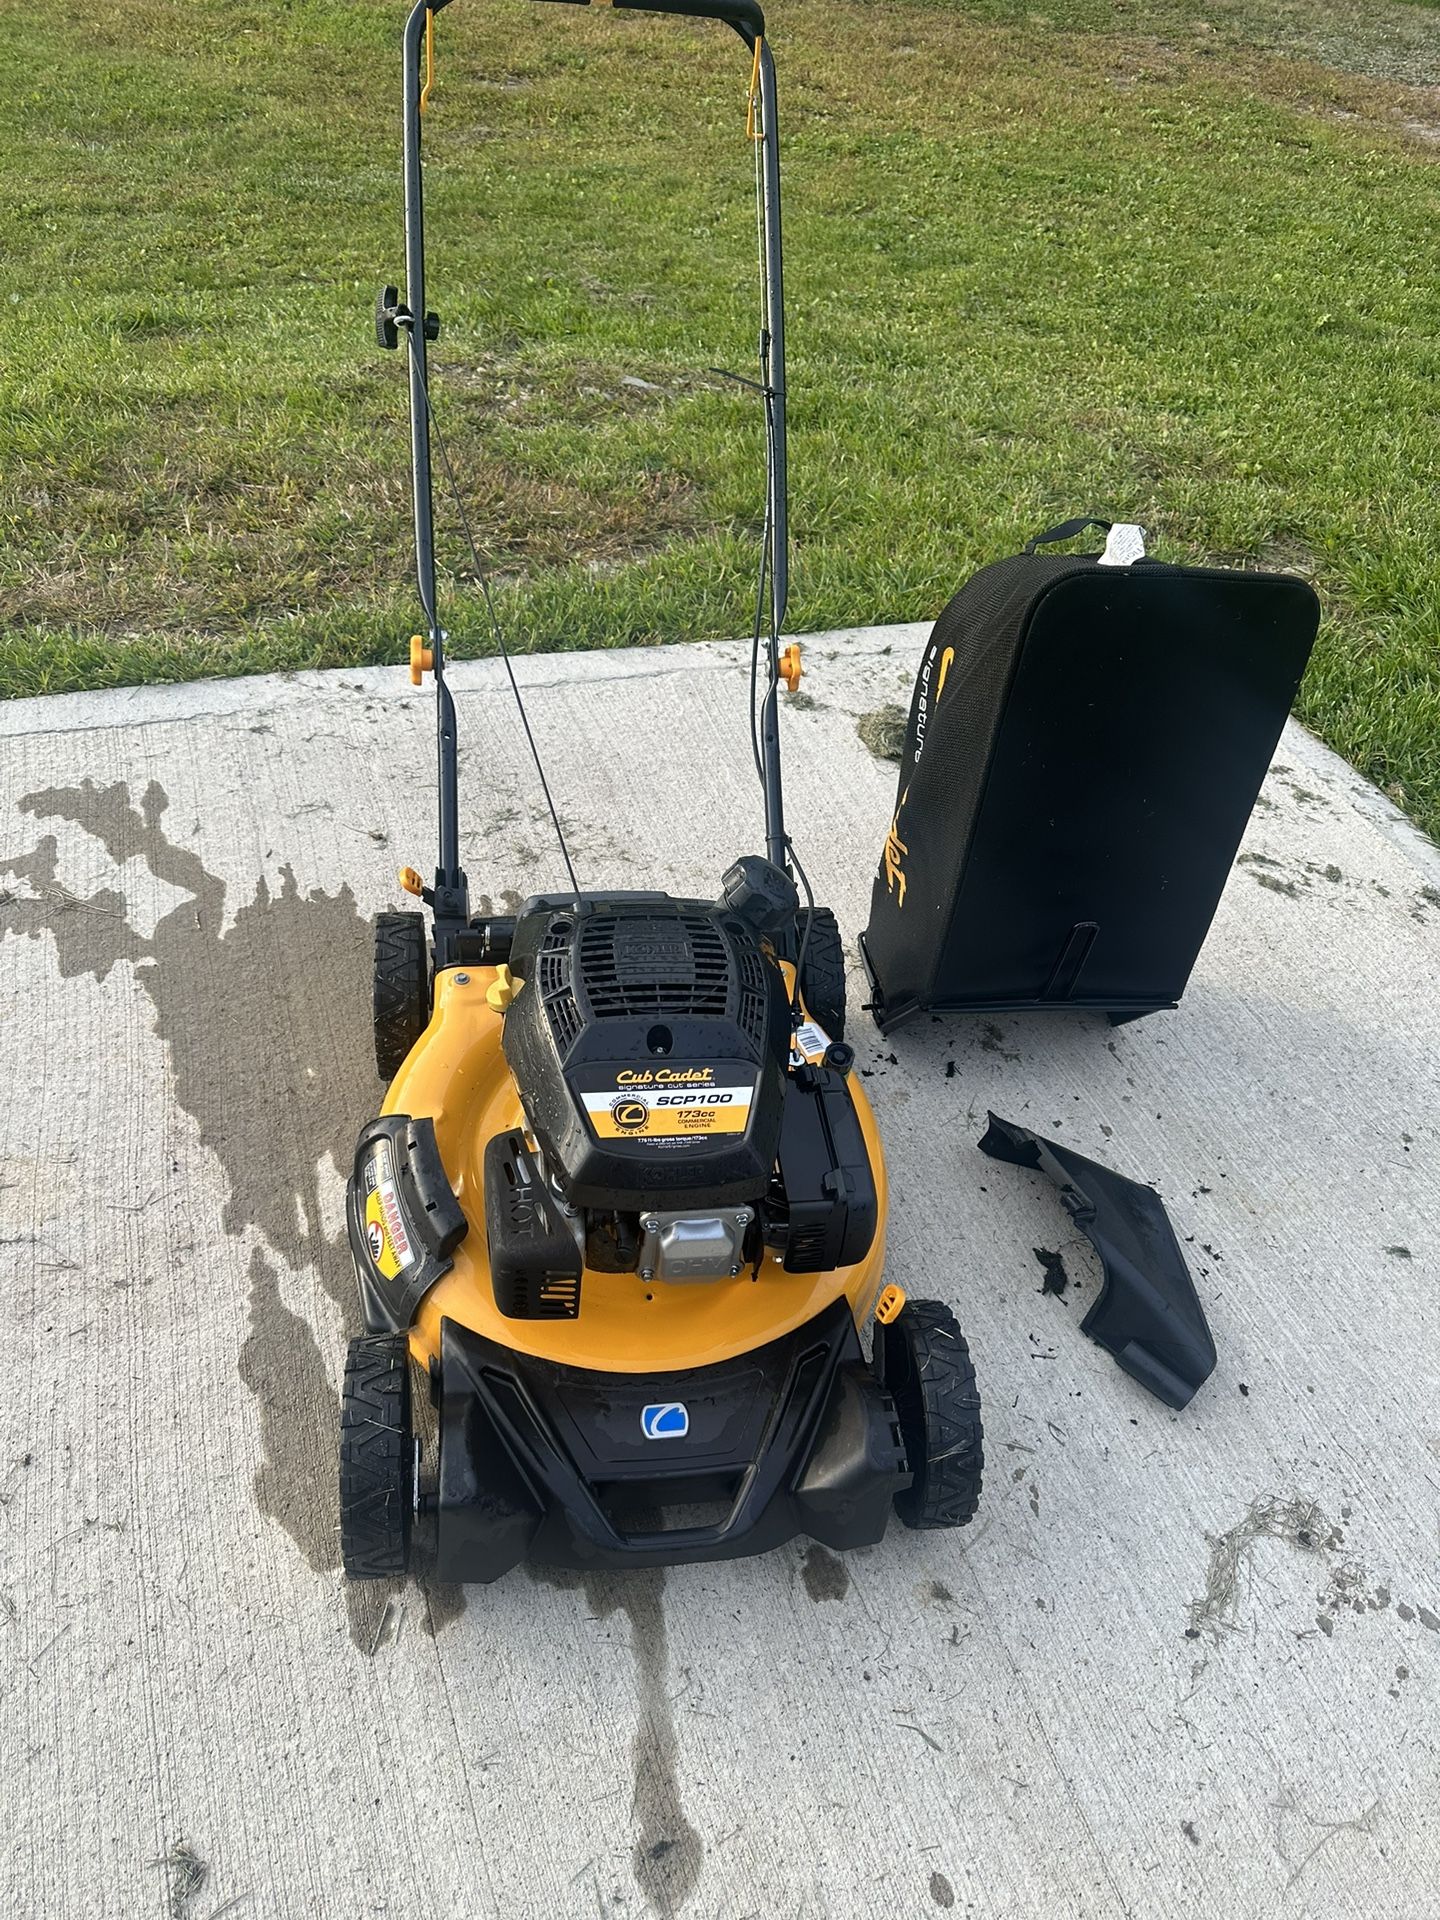 LIKE NEW CUB CADET SCP100 21-inch 3-in-1 Gas Push Mower Kohler Commercial Engine RETAILS OVER $450 SELLING ONLY $300!!